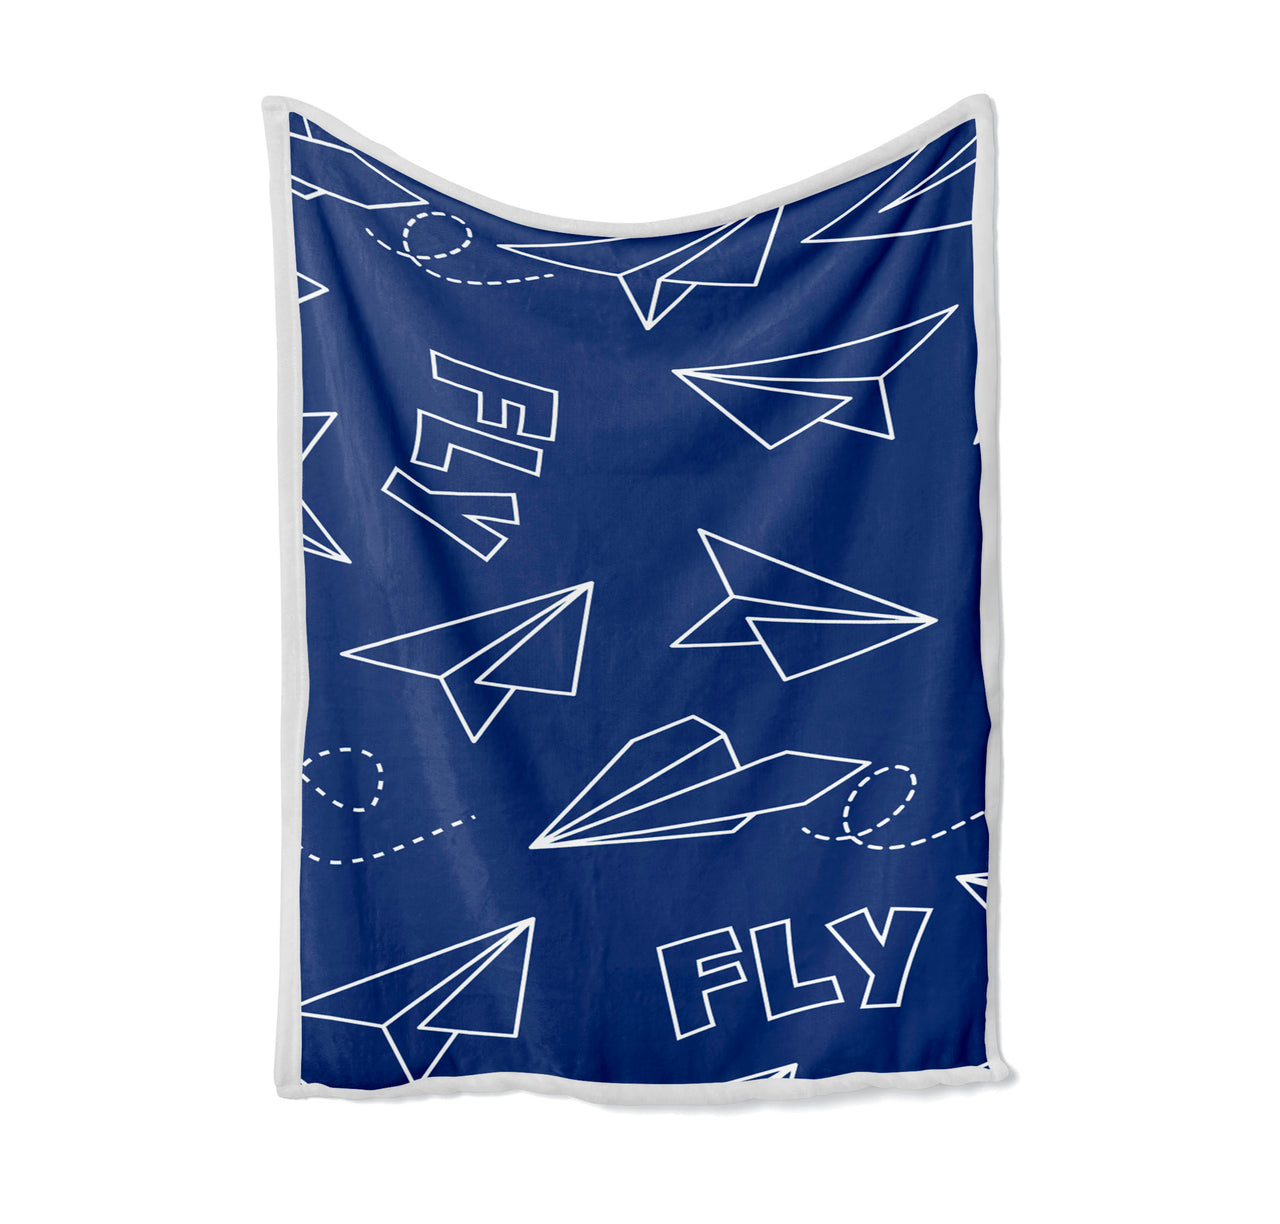 Paper Airplane & Fly-Blue Designed Bed Blankets & Covers